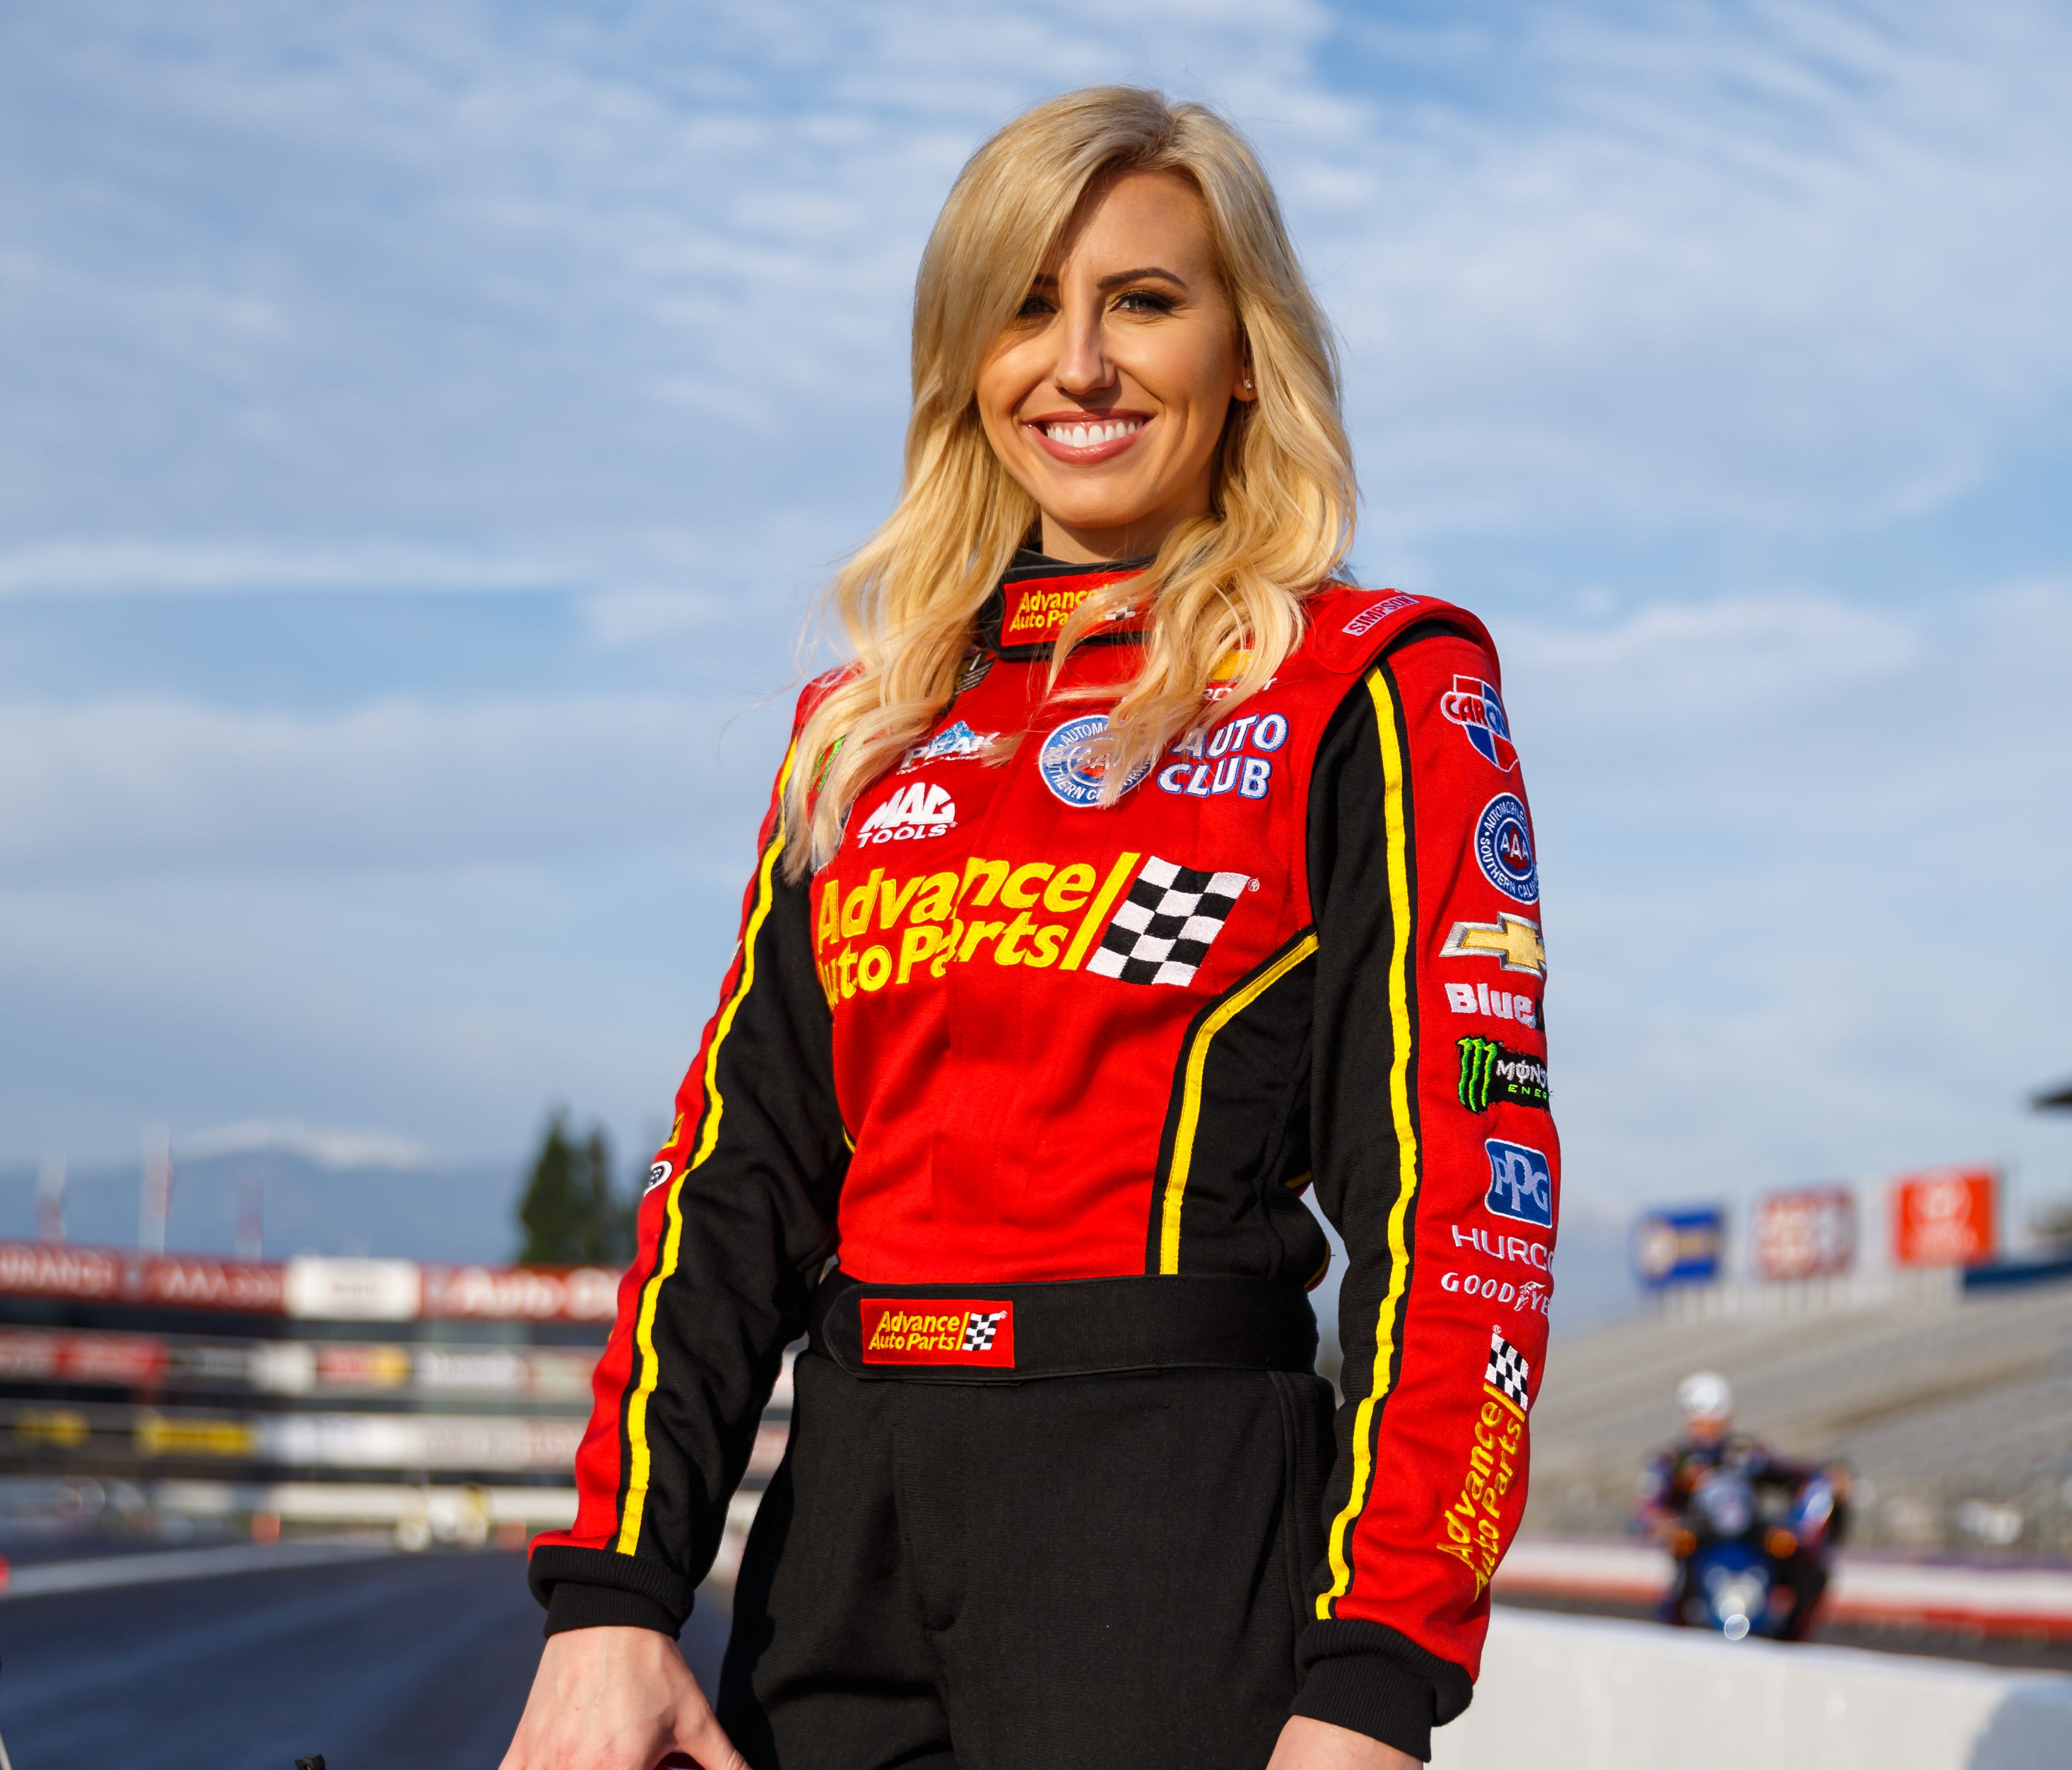 Courtney Force is ranked third in the Funny Car standings heading into this weekend's season finale.